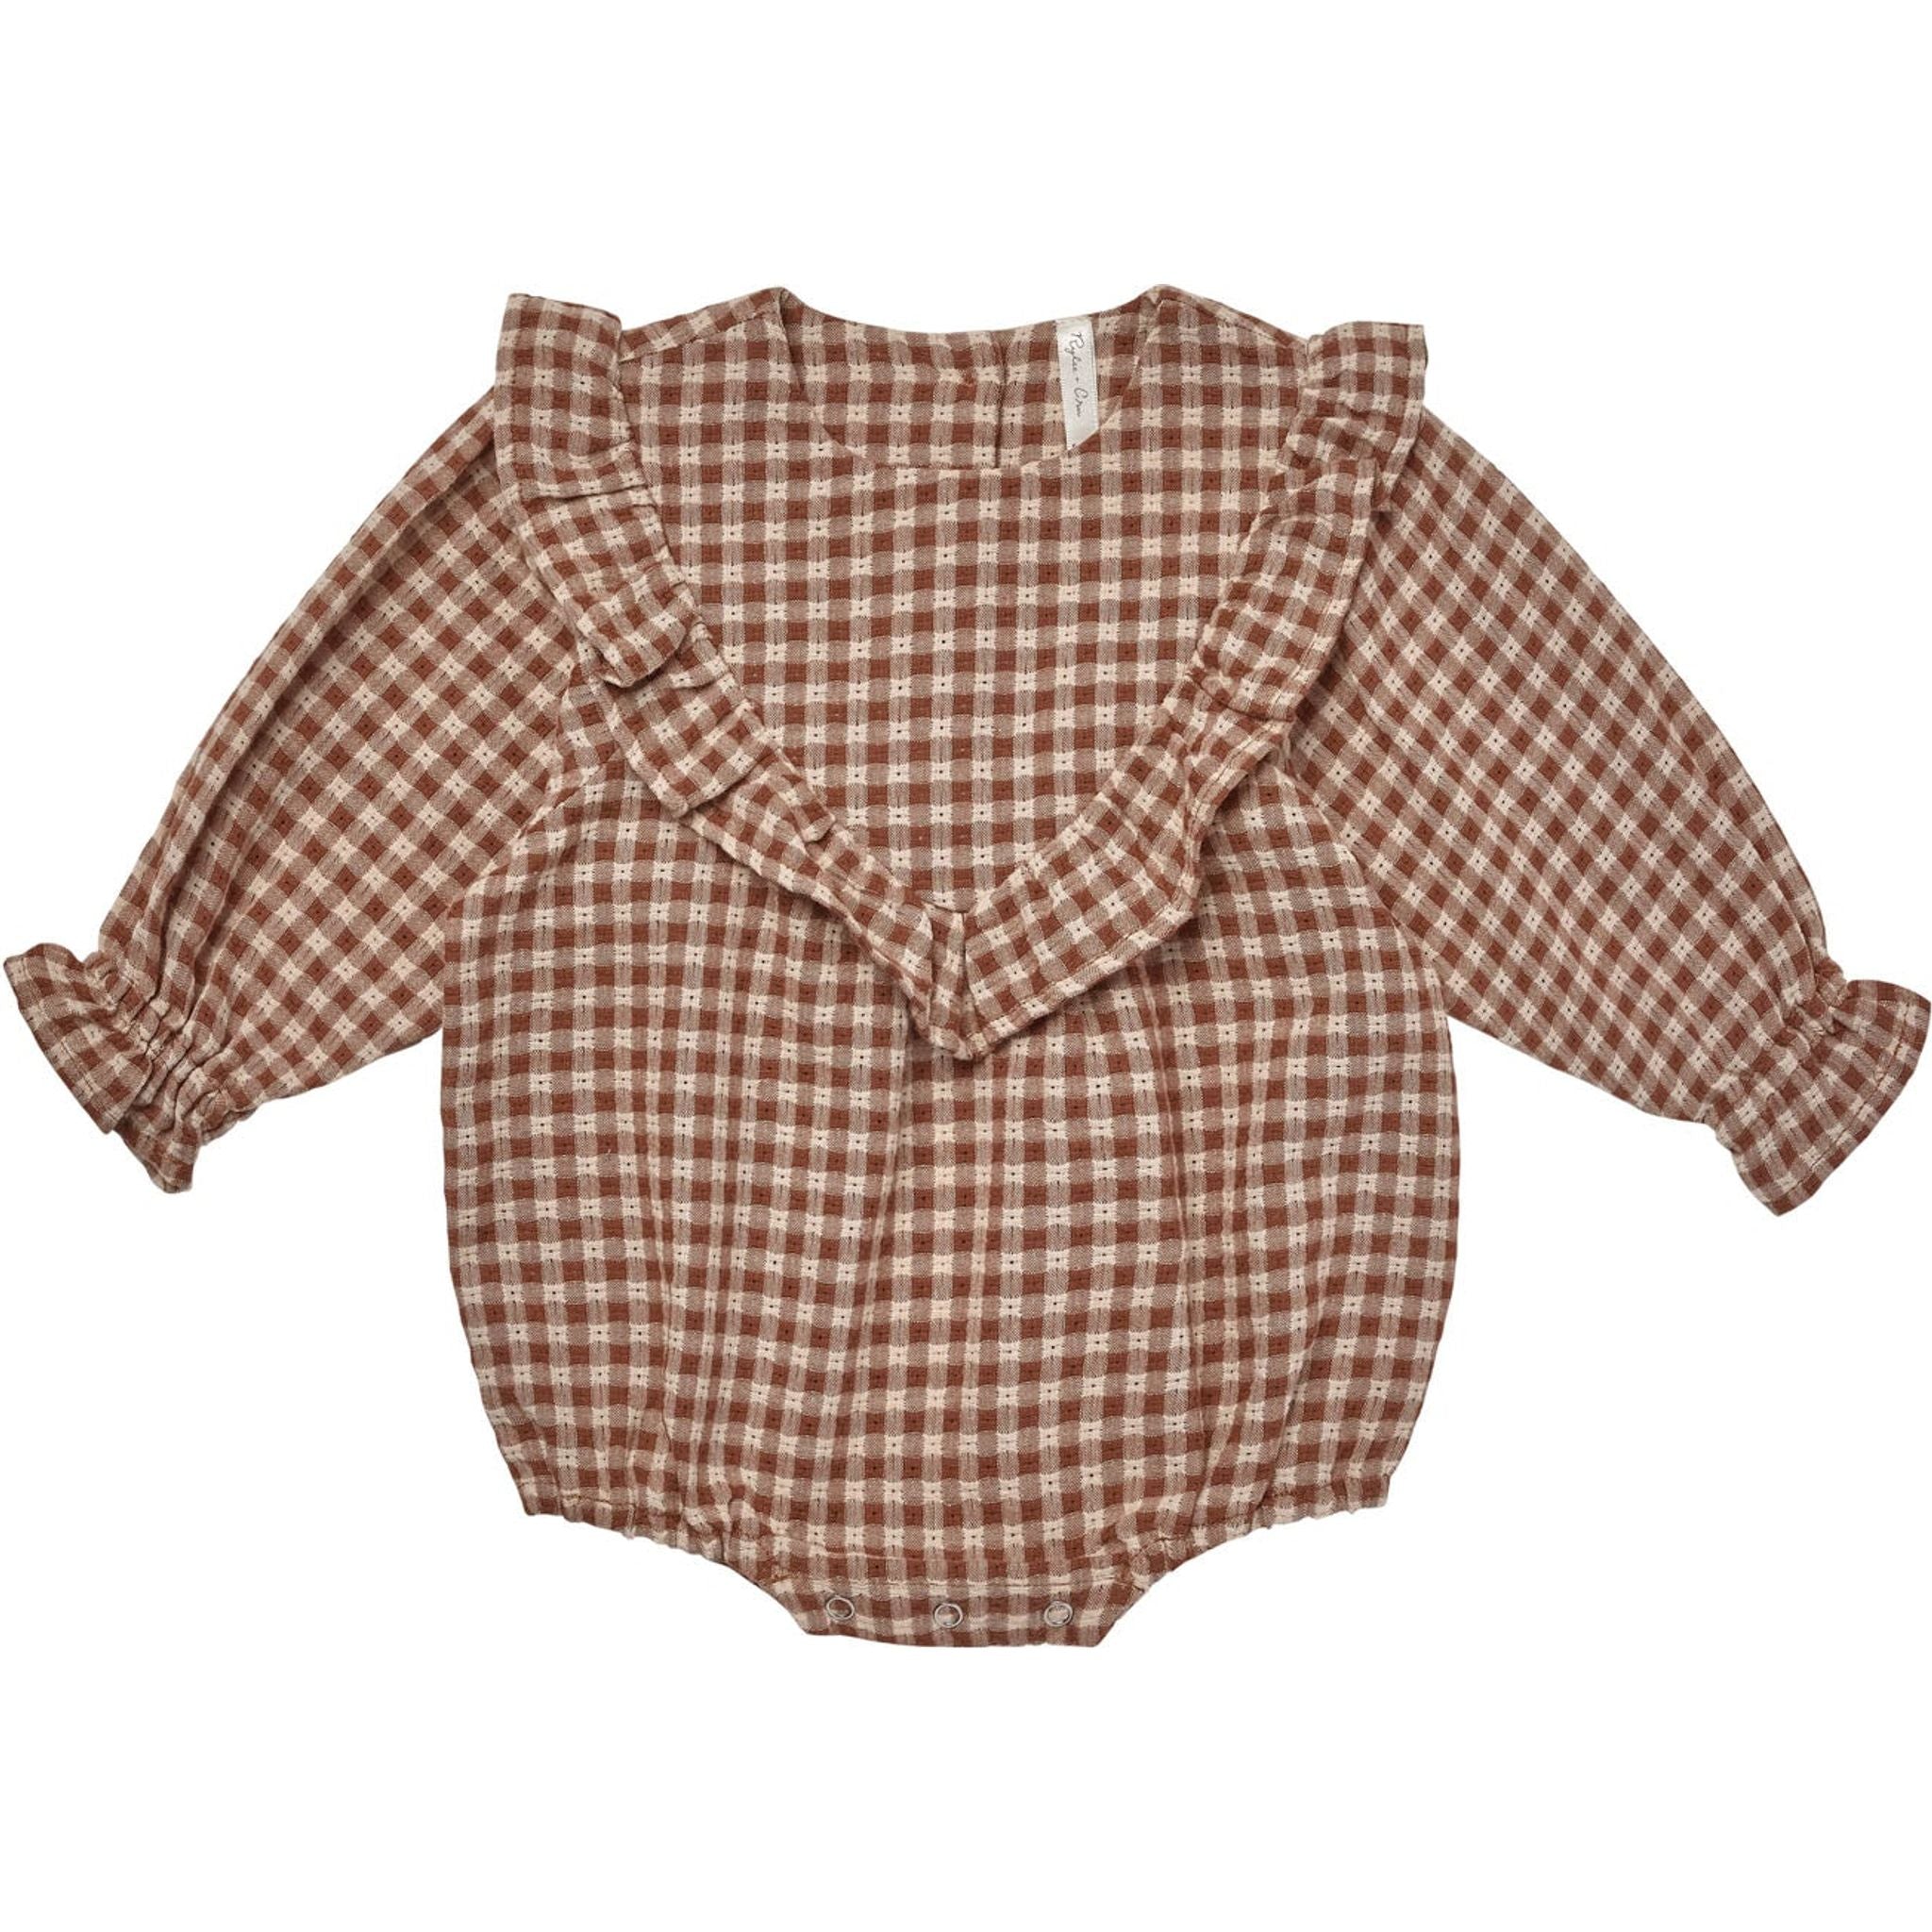 brown and cream gingham Baby bubble romper featuring a v shape with ruffle trim details, elastic sleeve openings, and leg openings to create a bubble silhouette